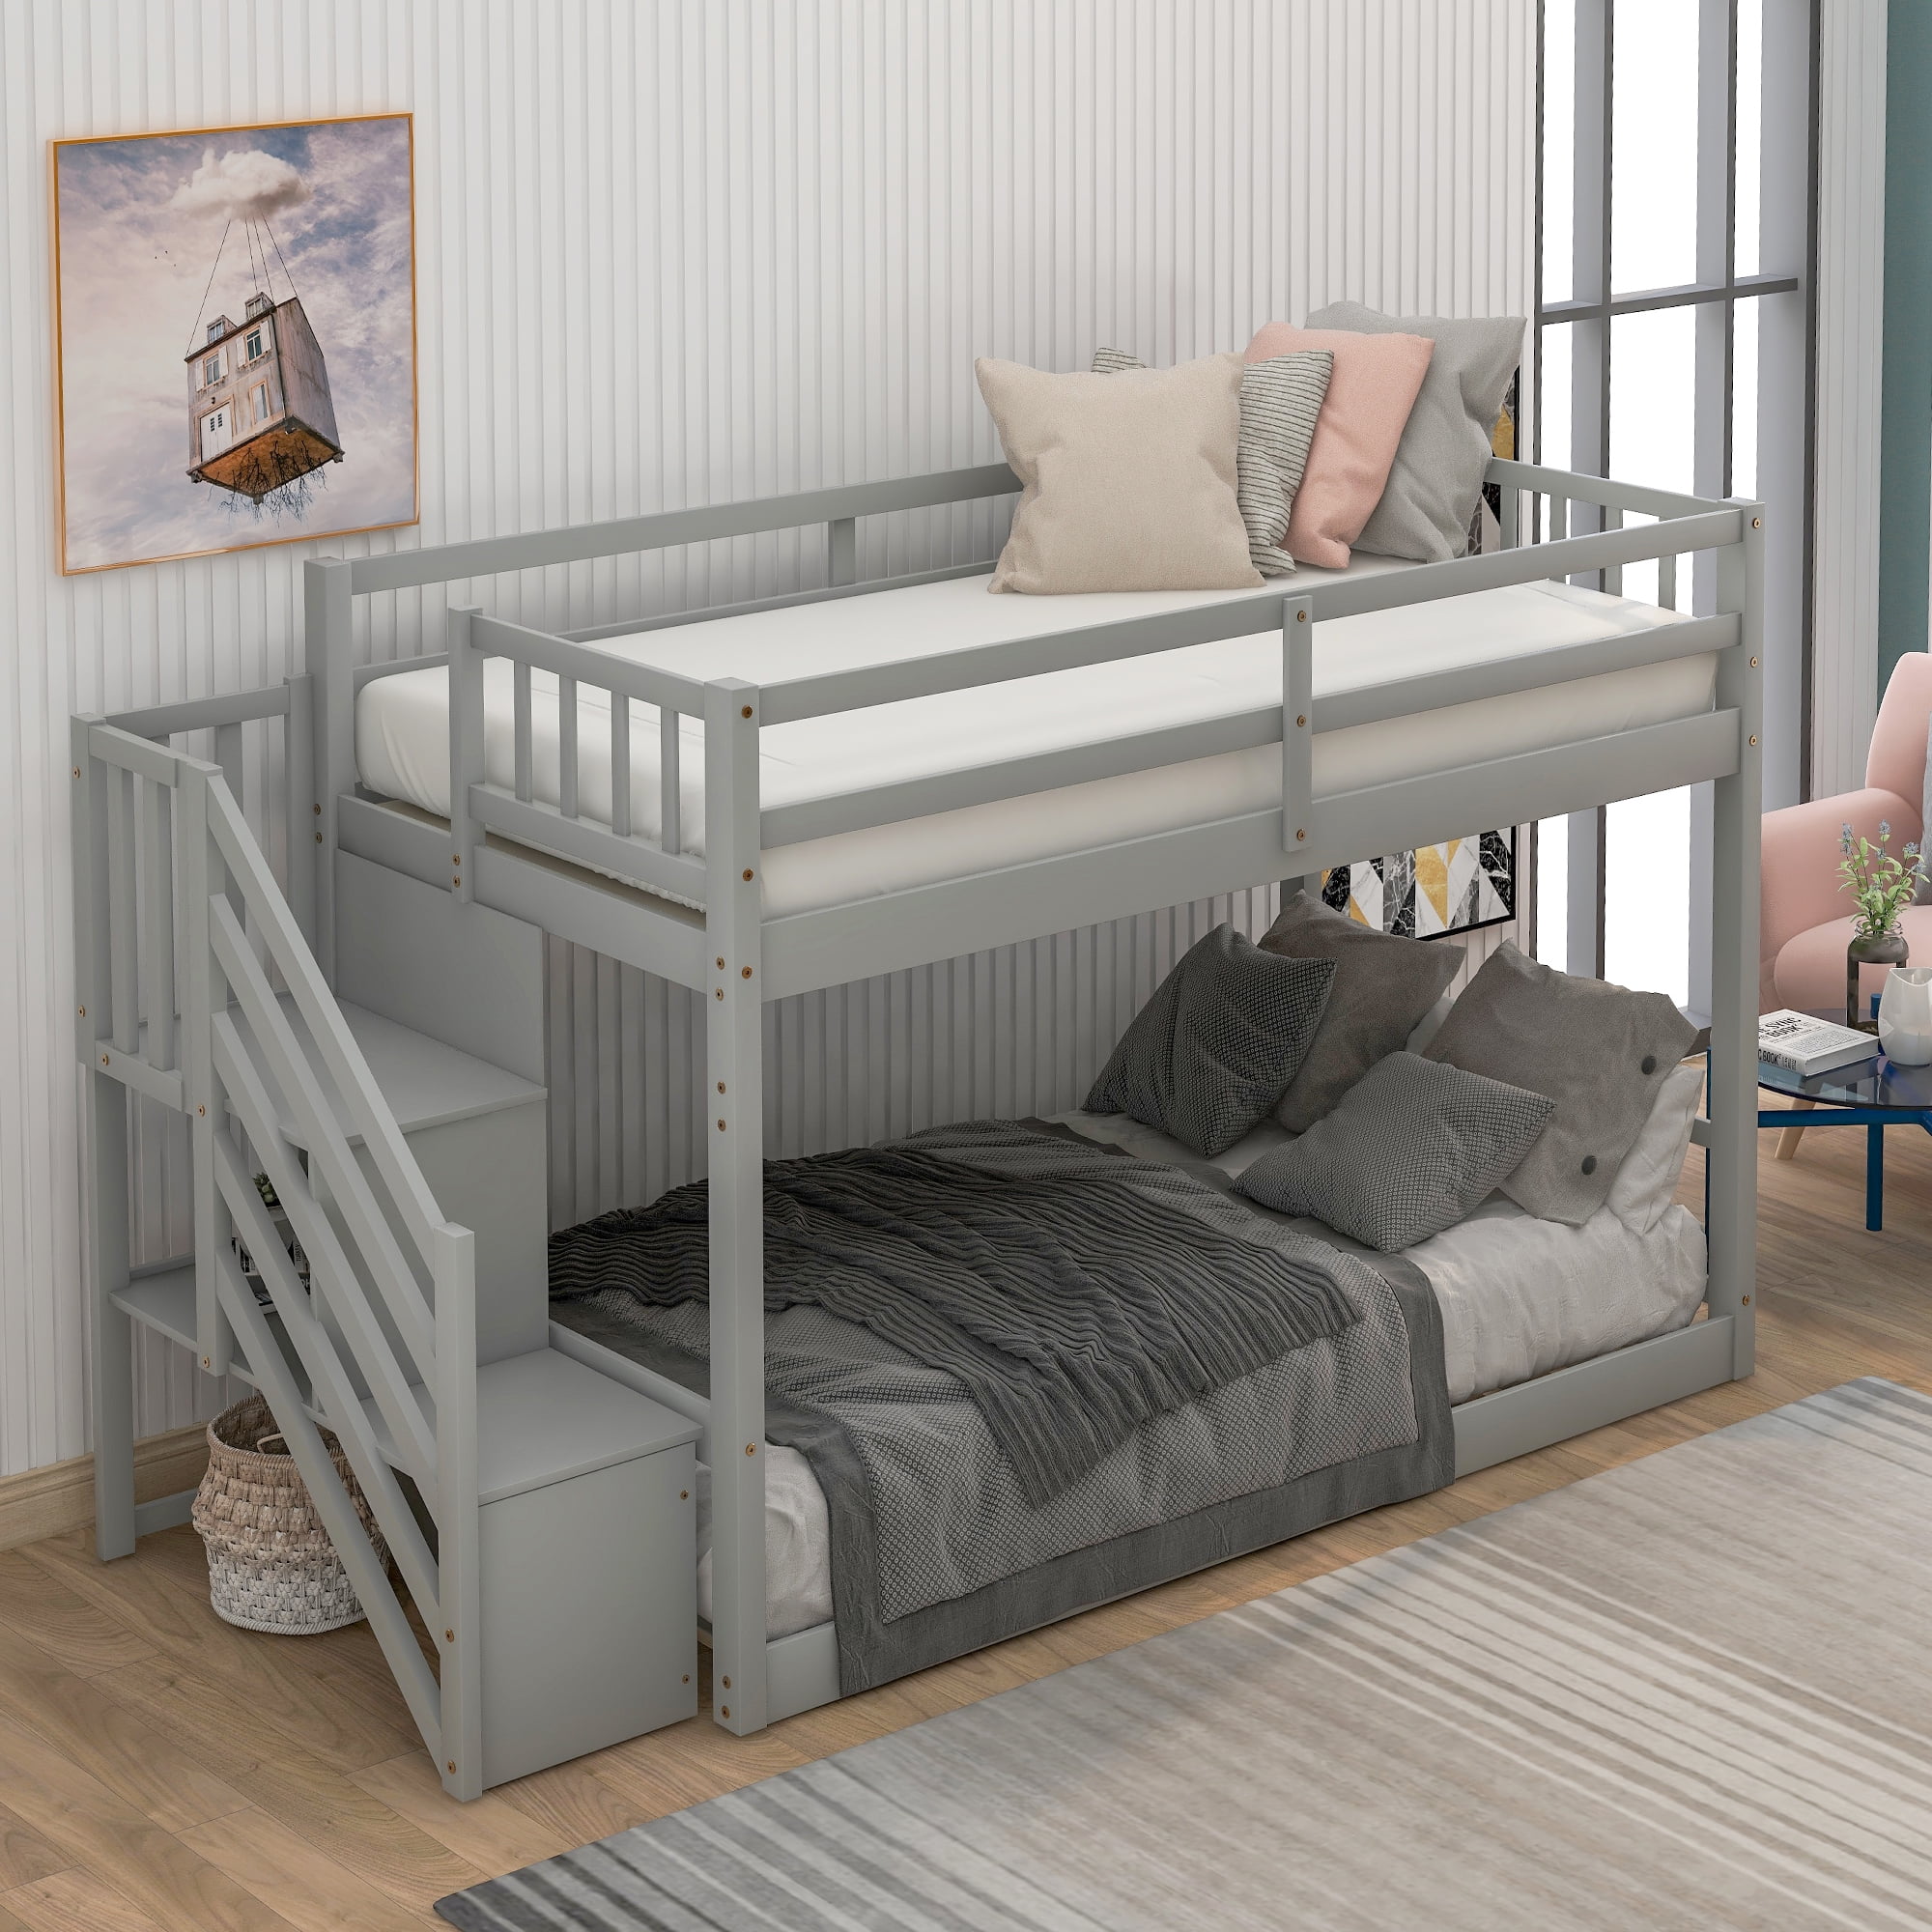 Euroco Wood Twin Over Floor Bunk, Twin Over Twin Bunk Beds With Stairs